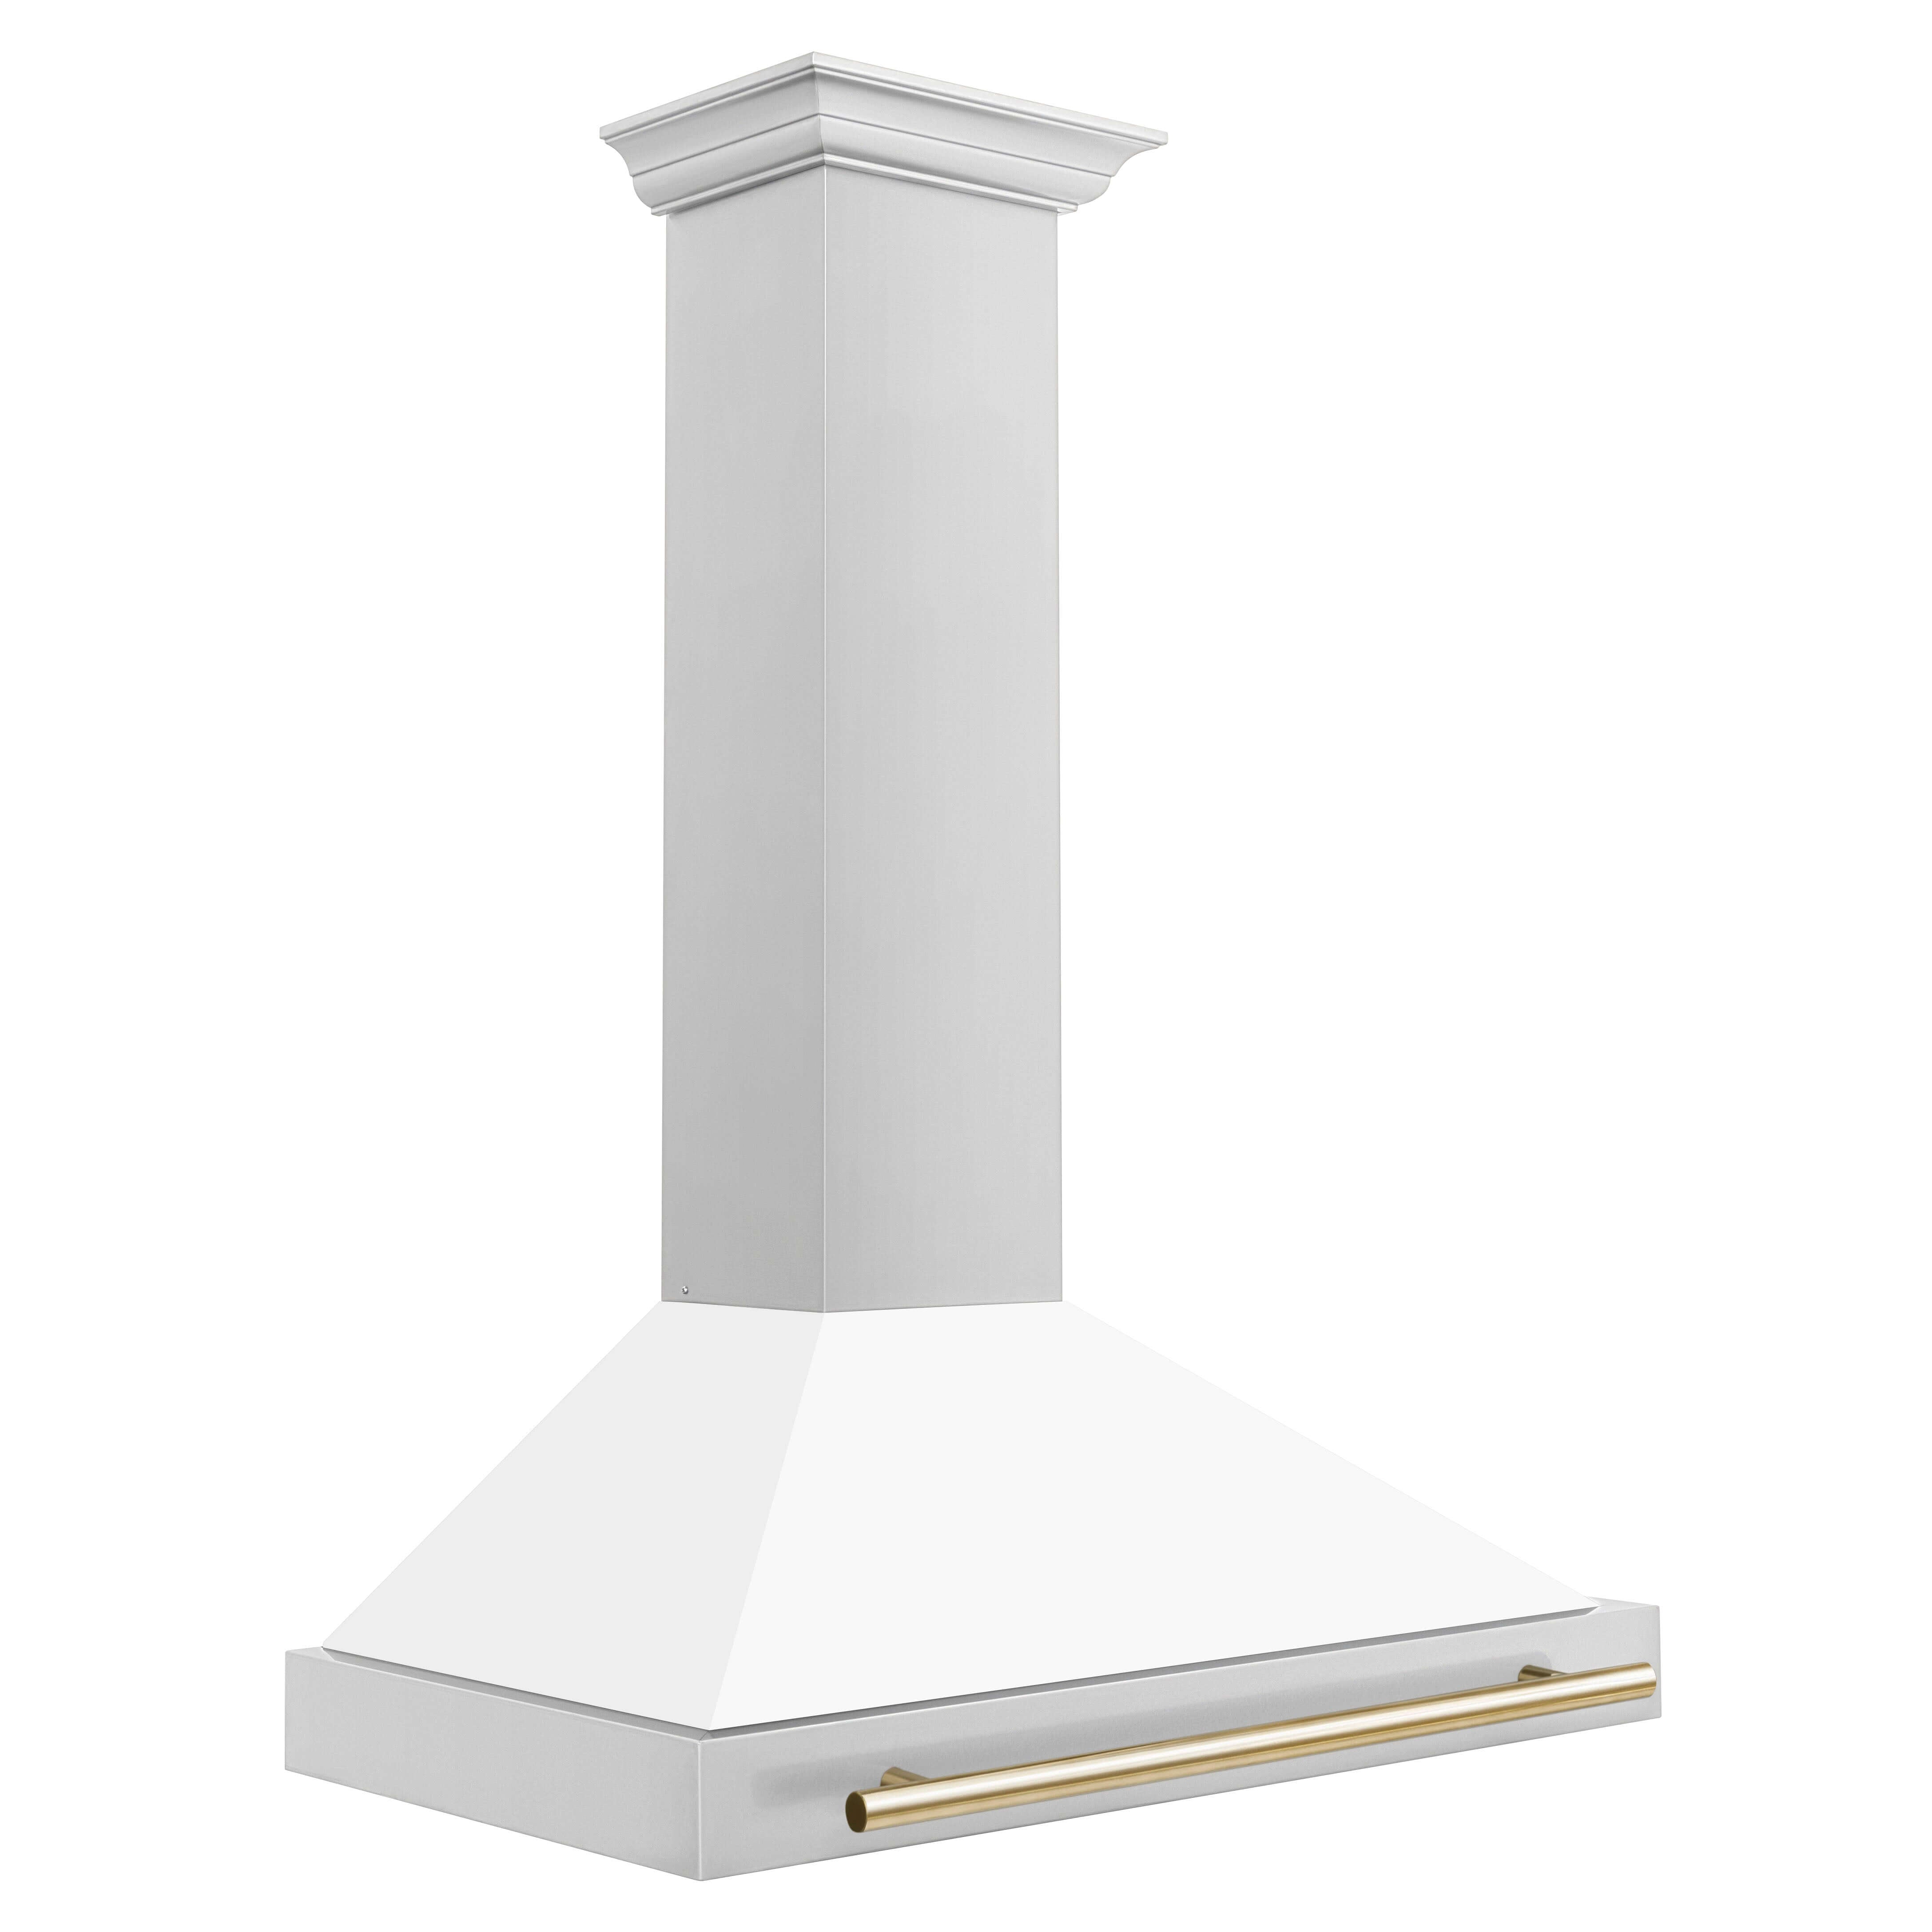 ZLINE Autograph Edition 36 in. Stainless Steel Range Hood with White Matte Shell and Accents (KB4STZ-WM36) side.